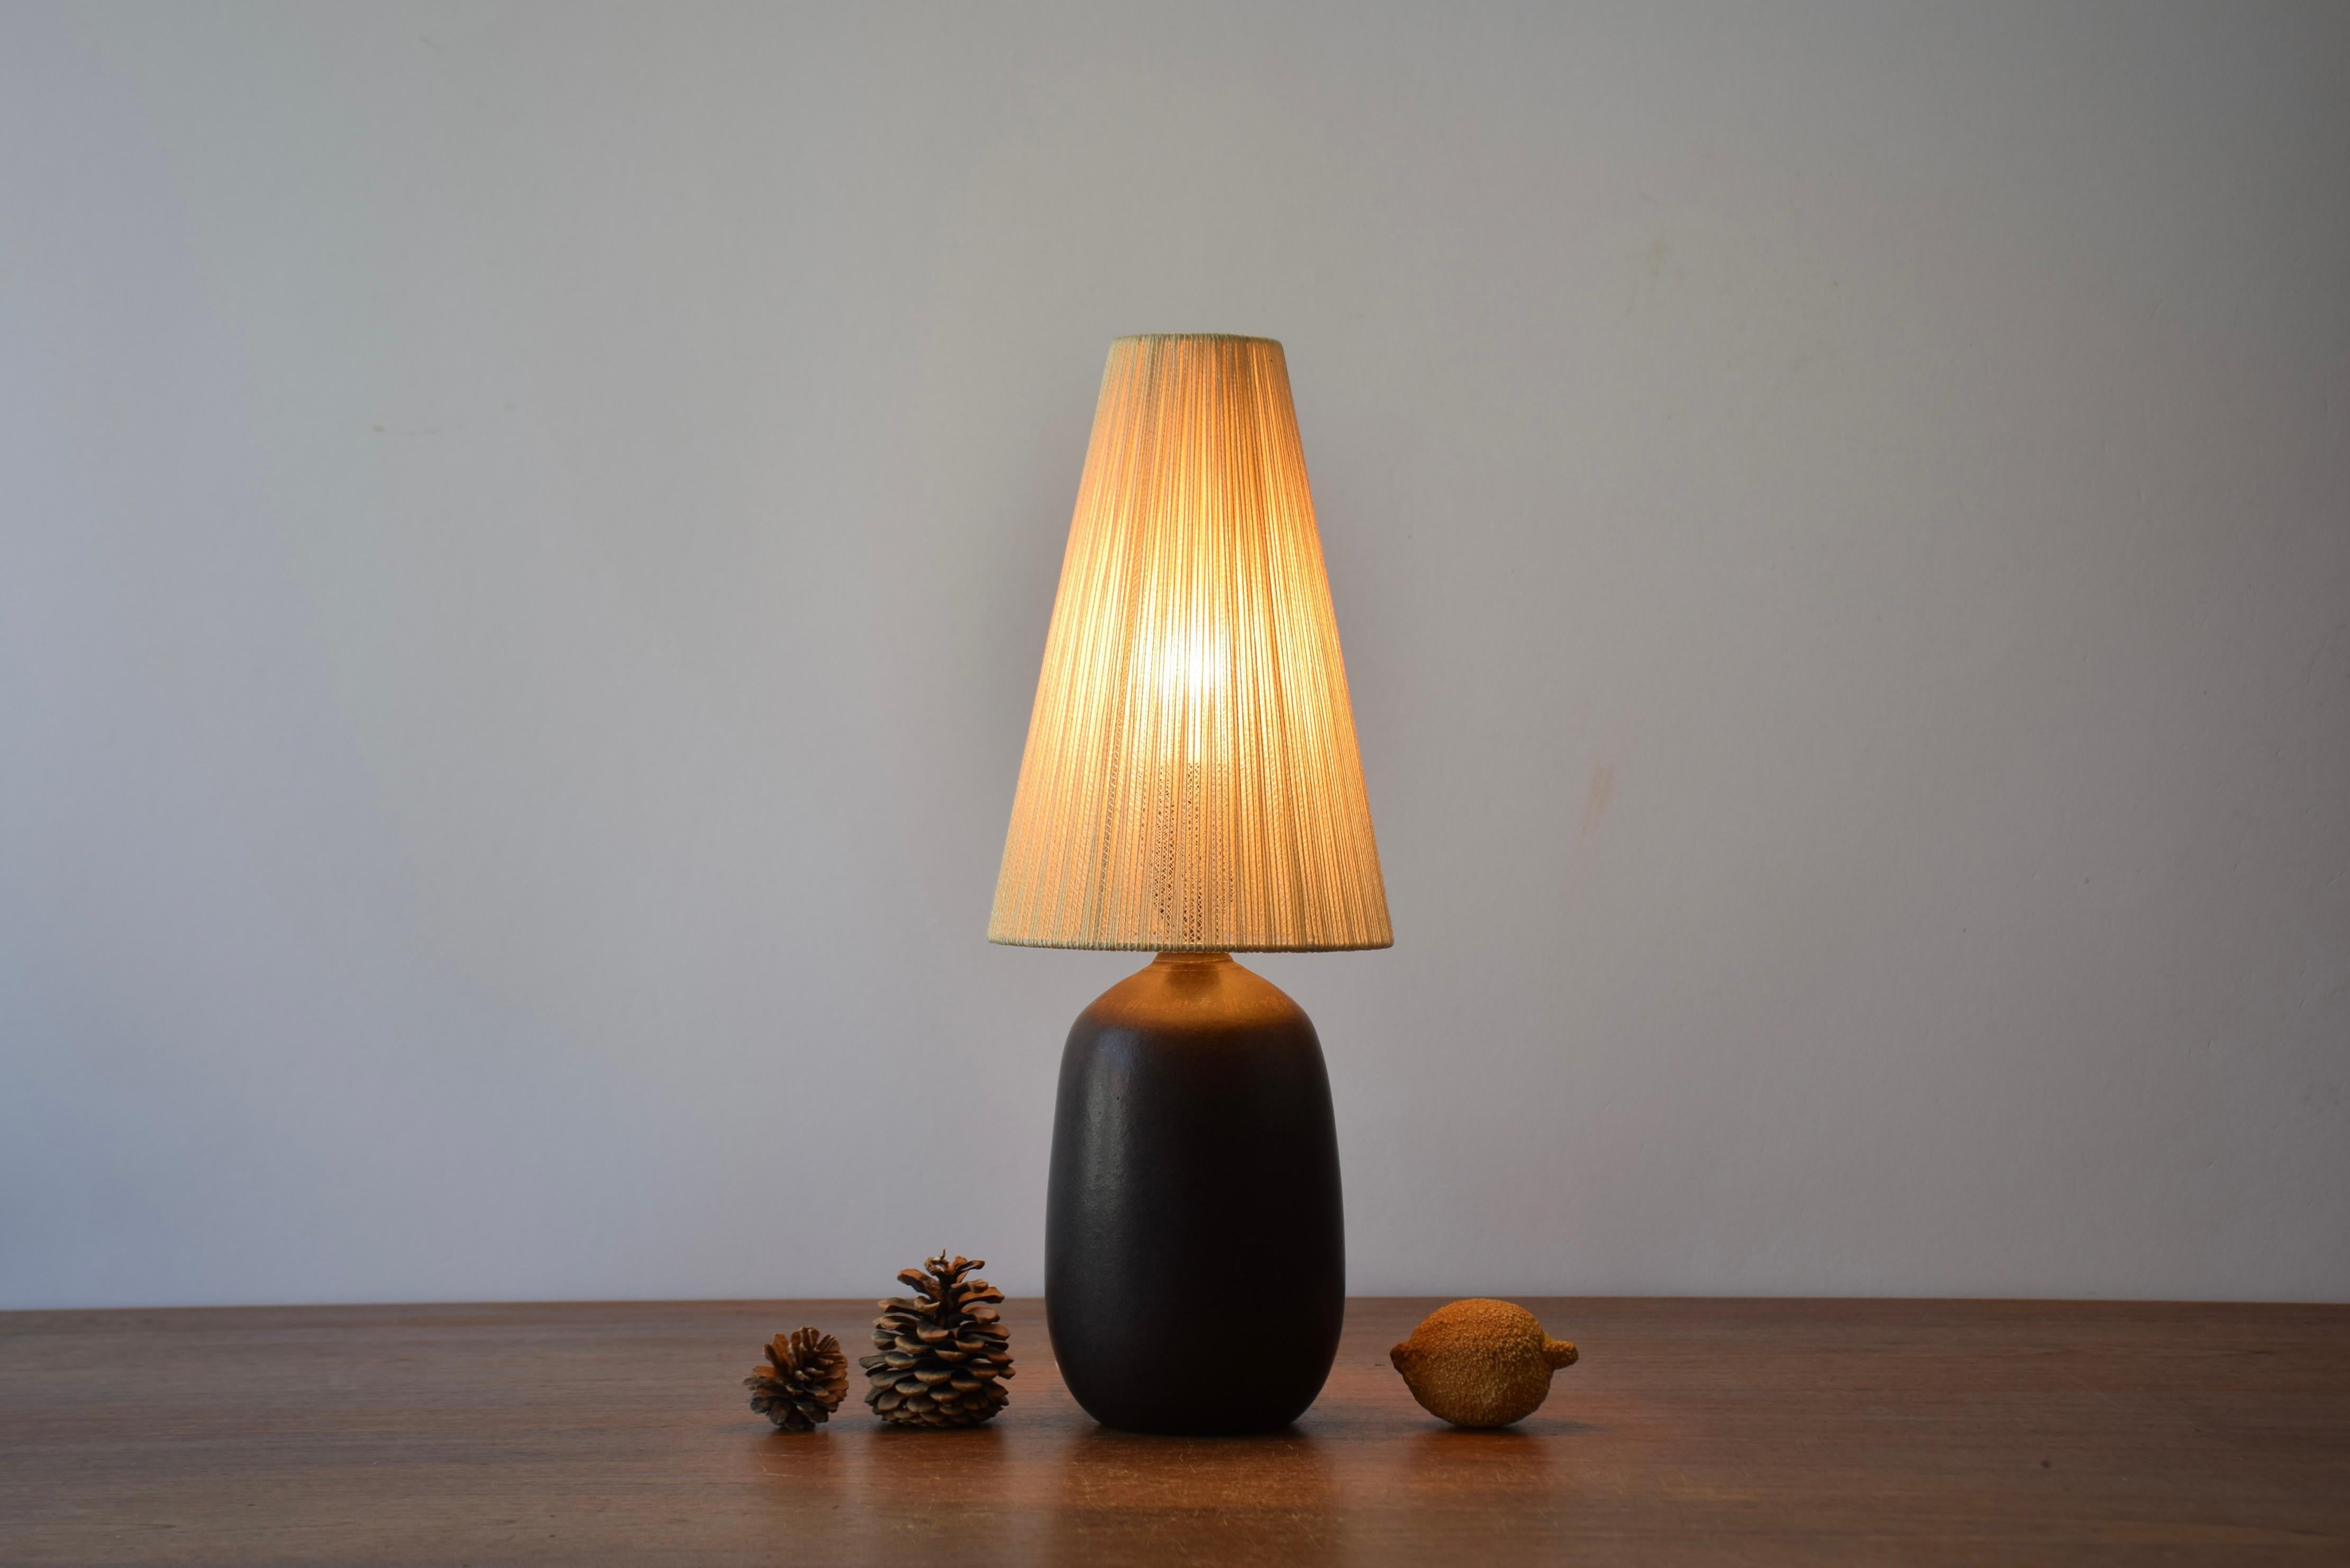 Small ceramic table lamp by Swedish designer and ceramist Agne Aronsson (1924-1990), made in his own studio in Bjärnum circa 1960s. 

The lamp comes with a vintage lampshade which most likely is the original one. It's a clip-on shade made with